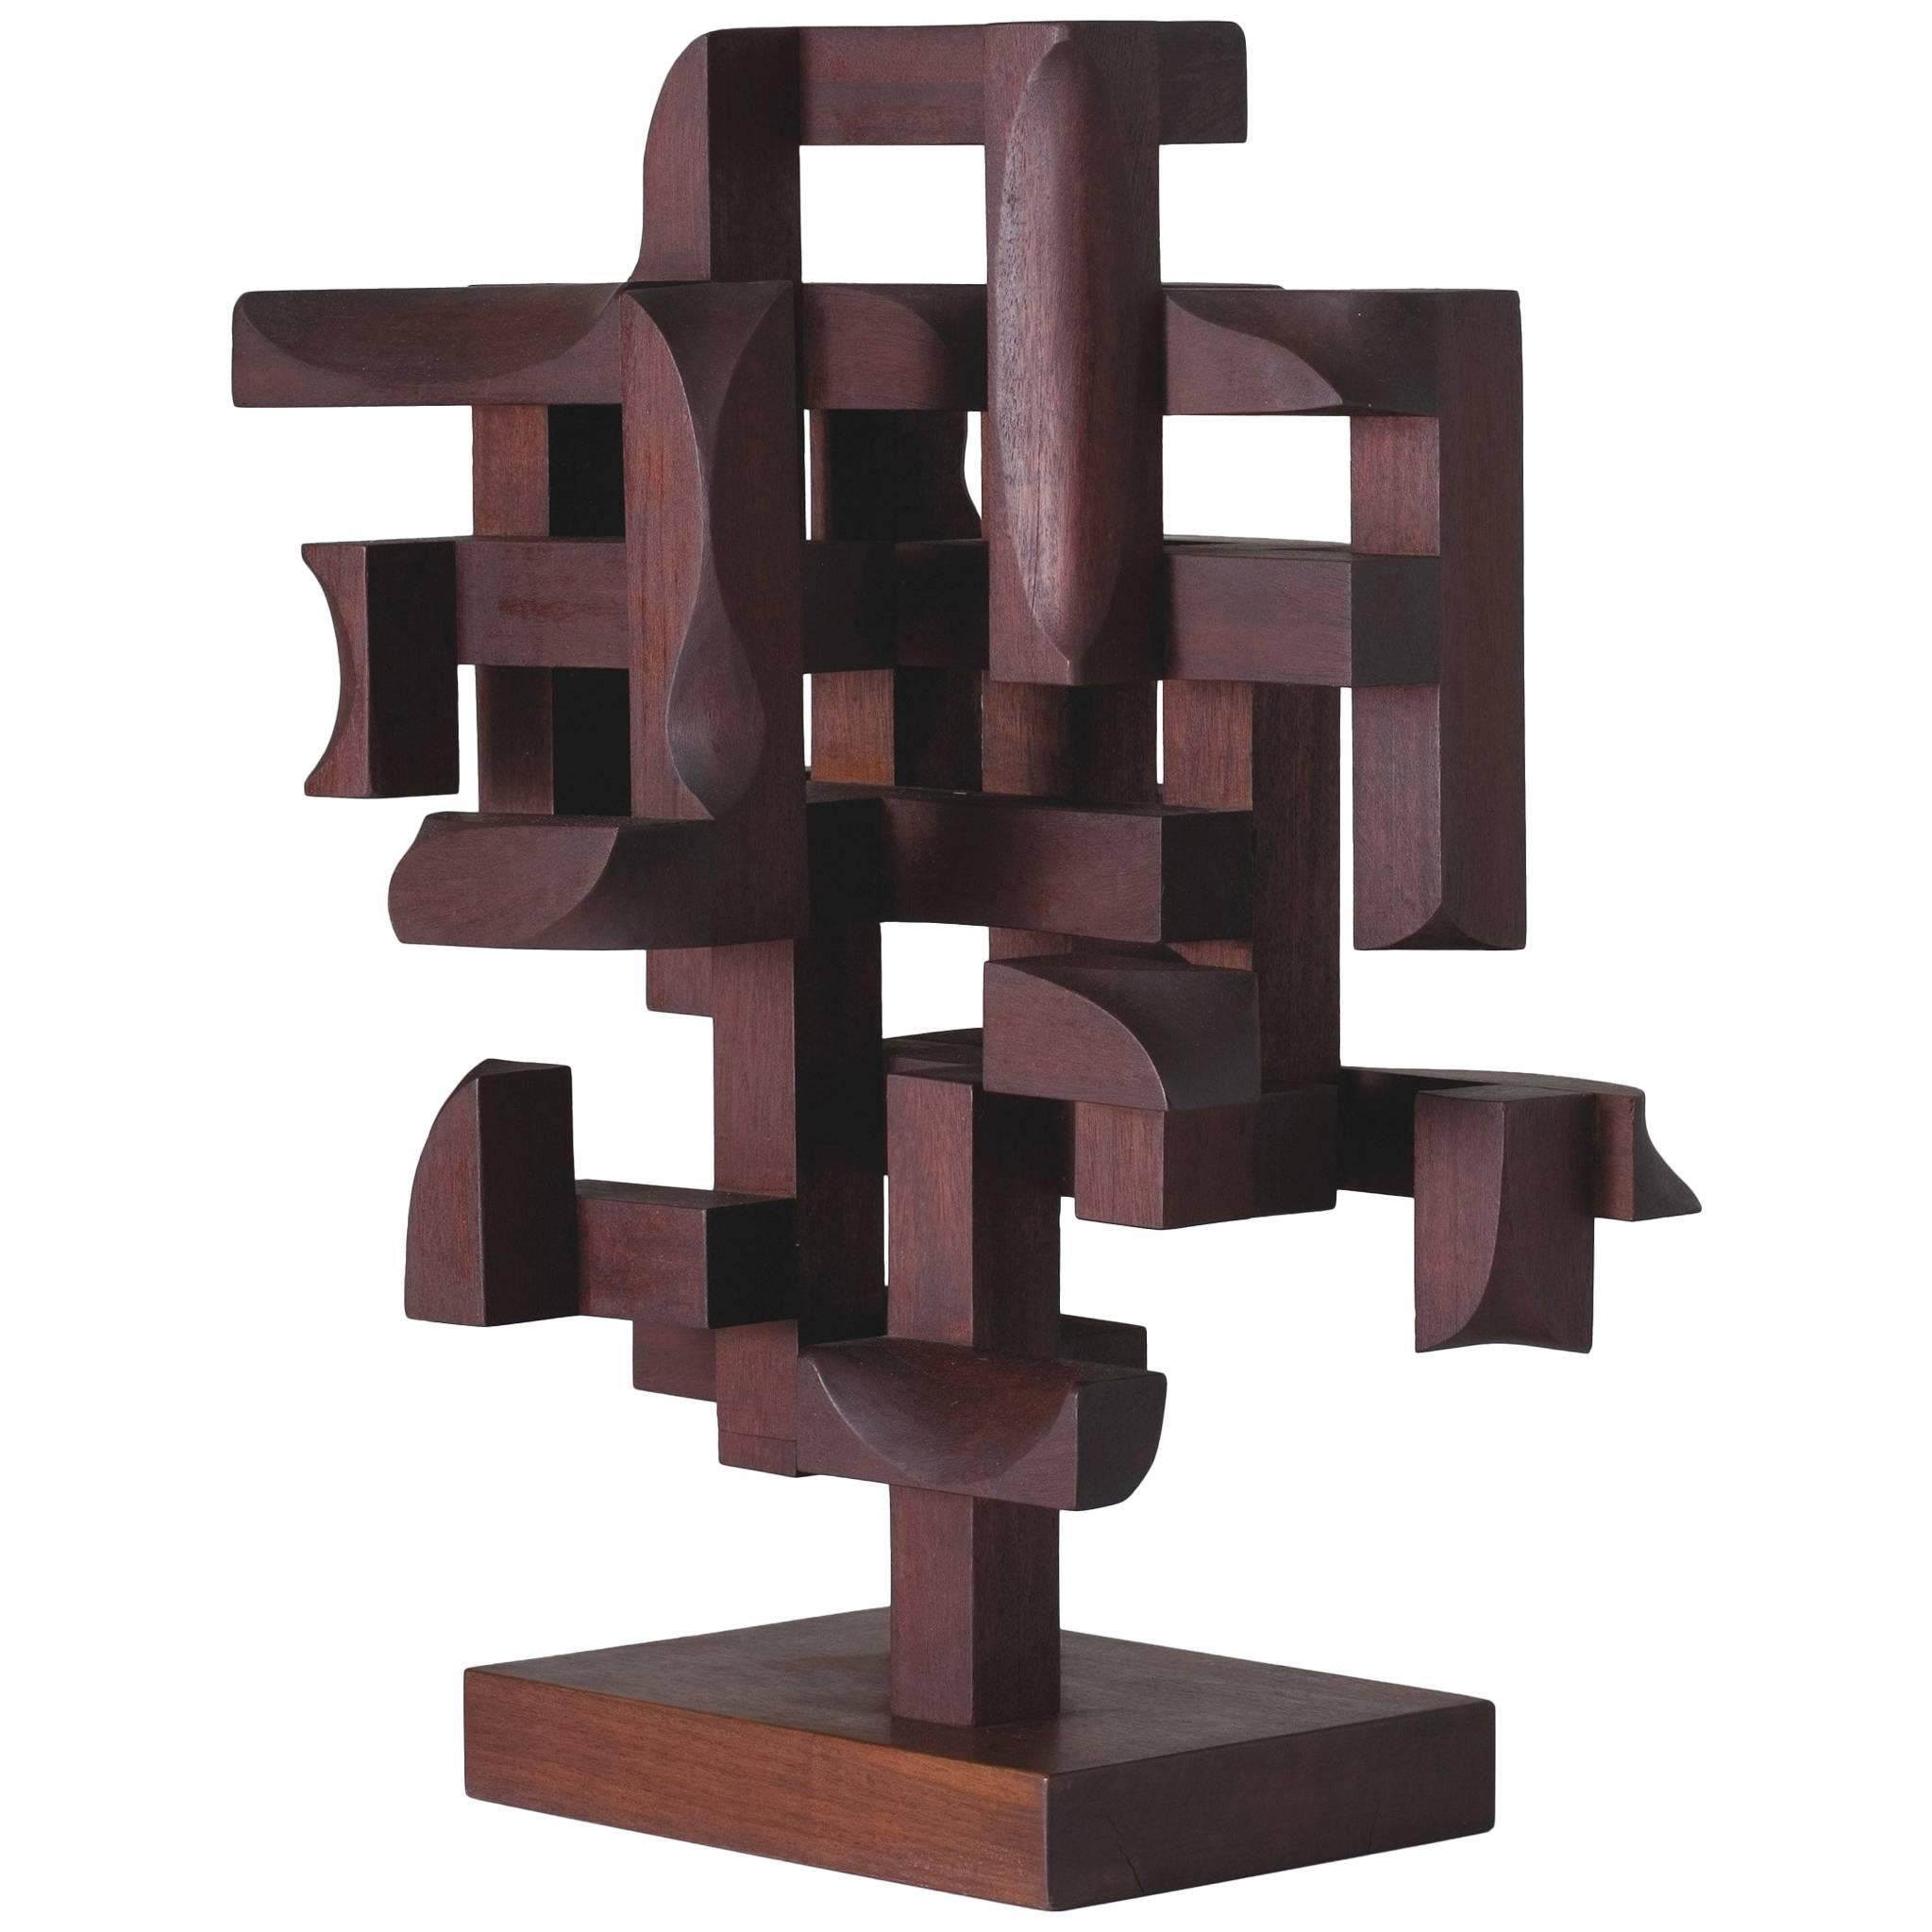 Mario Dal Fabbro, "Construction N. 5" Wood Sculpture, United States, 1970